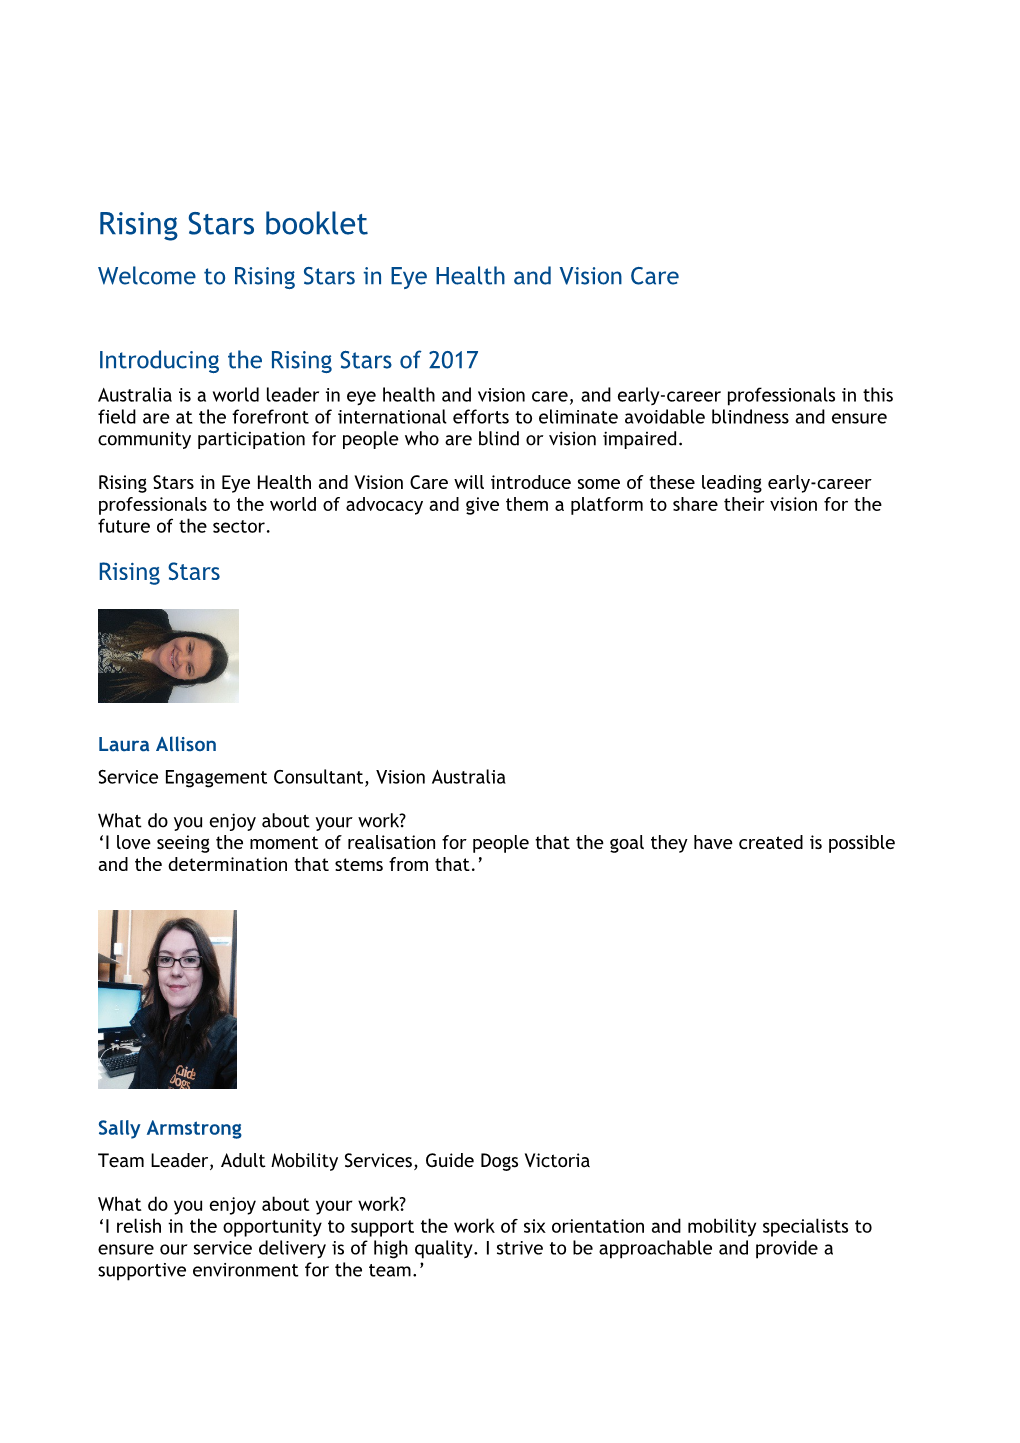 Welcome to Rising Stars in Eye Health and Vision Care